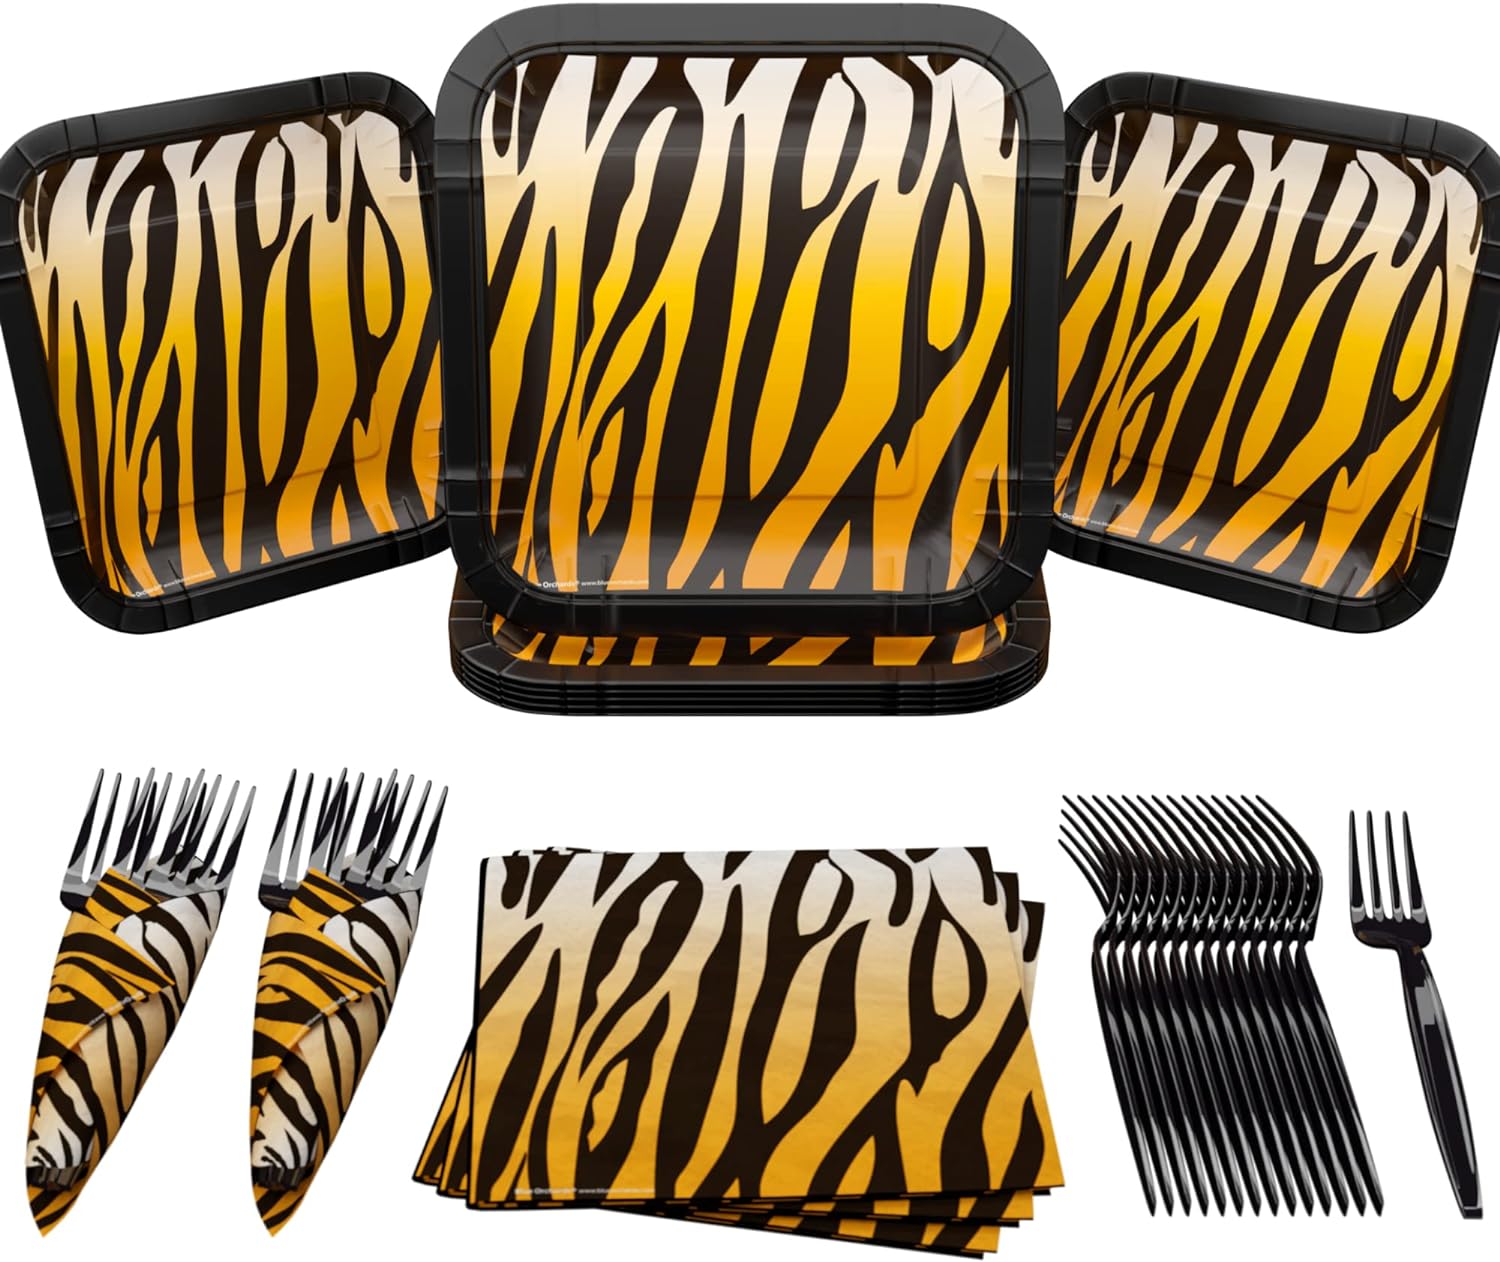 Tiger Stripe Value Party Supplies Packs (For 16 Guests)